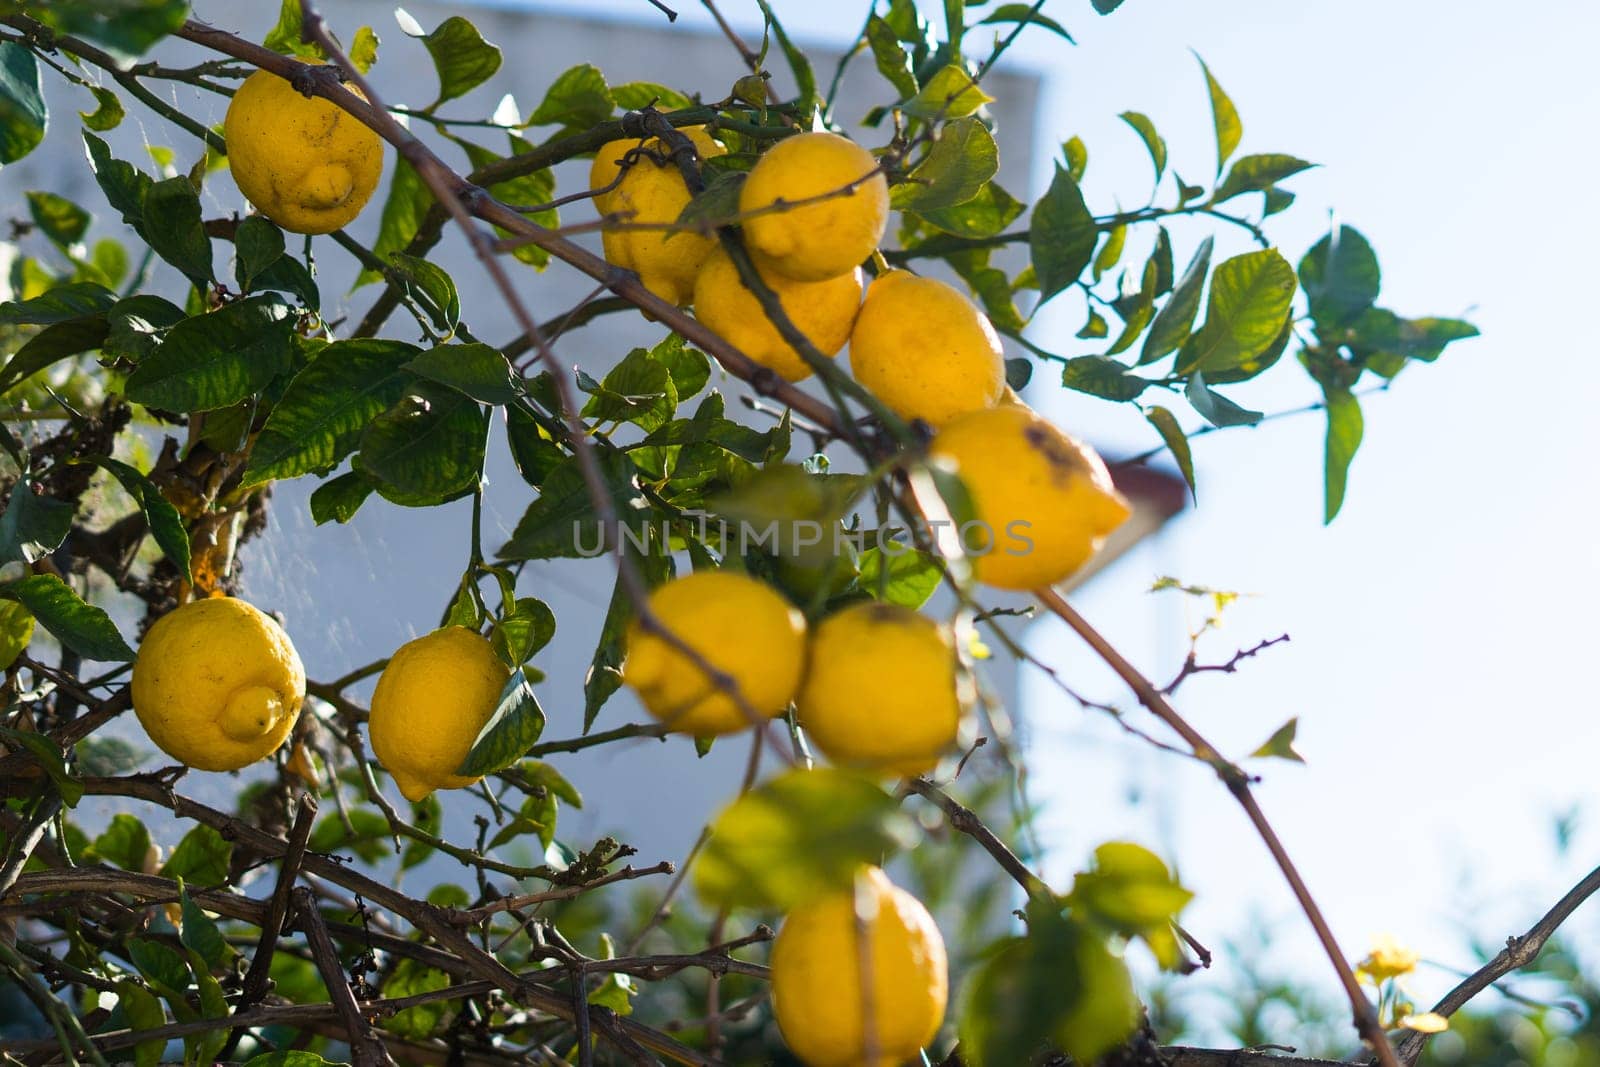 Lemon garden ready for harvest. Bunches of fresh yellow ripe lemons with a green leaves.